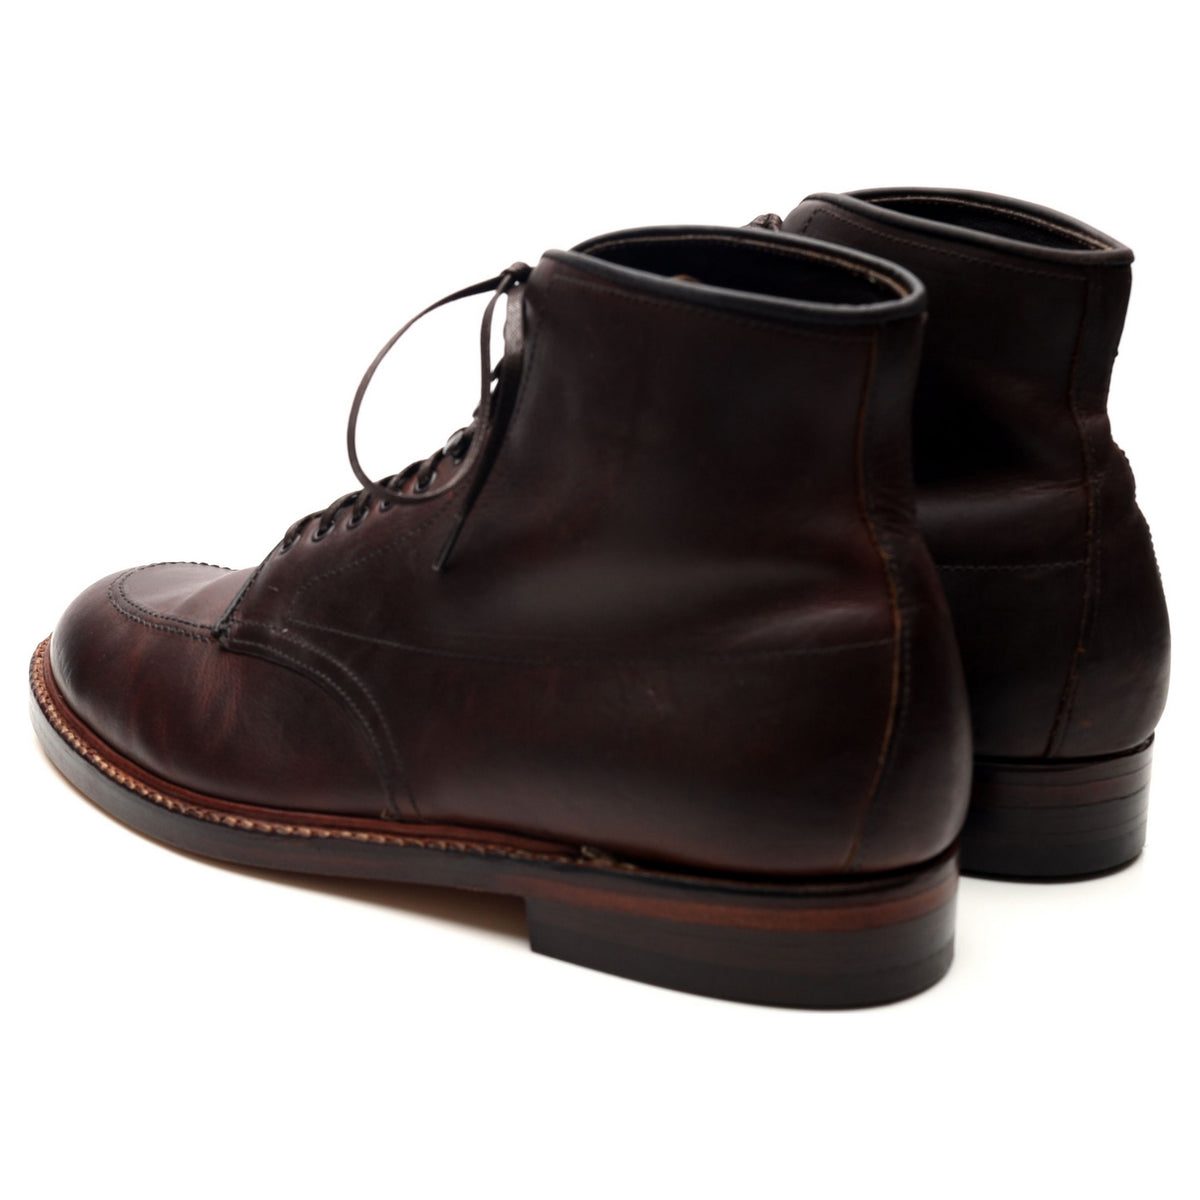 &#39;Indy&#39; Dark Brown Leather Boots UK 8 US 8.5